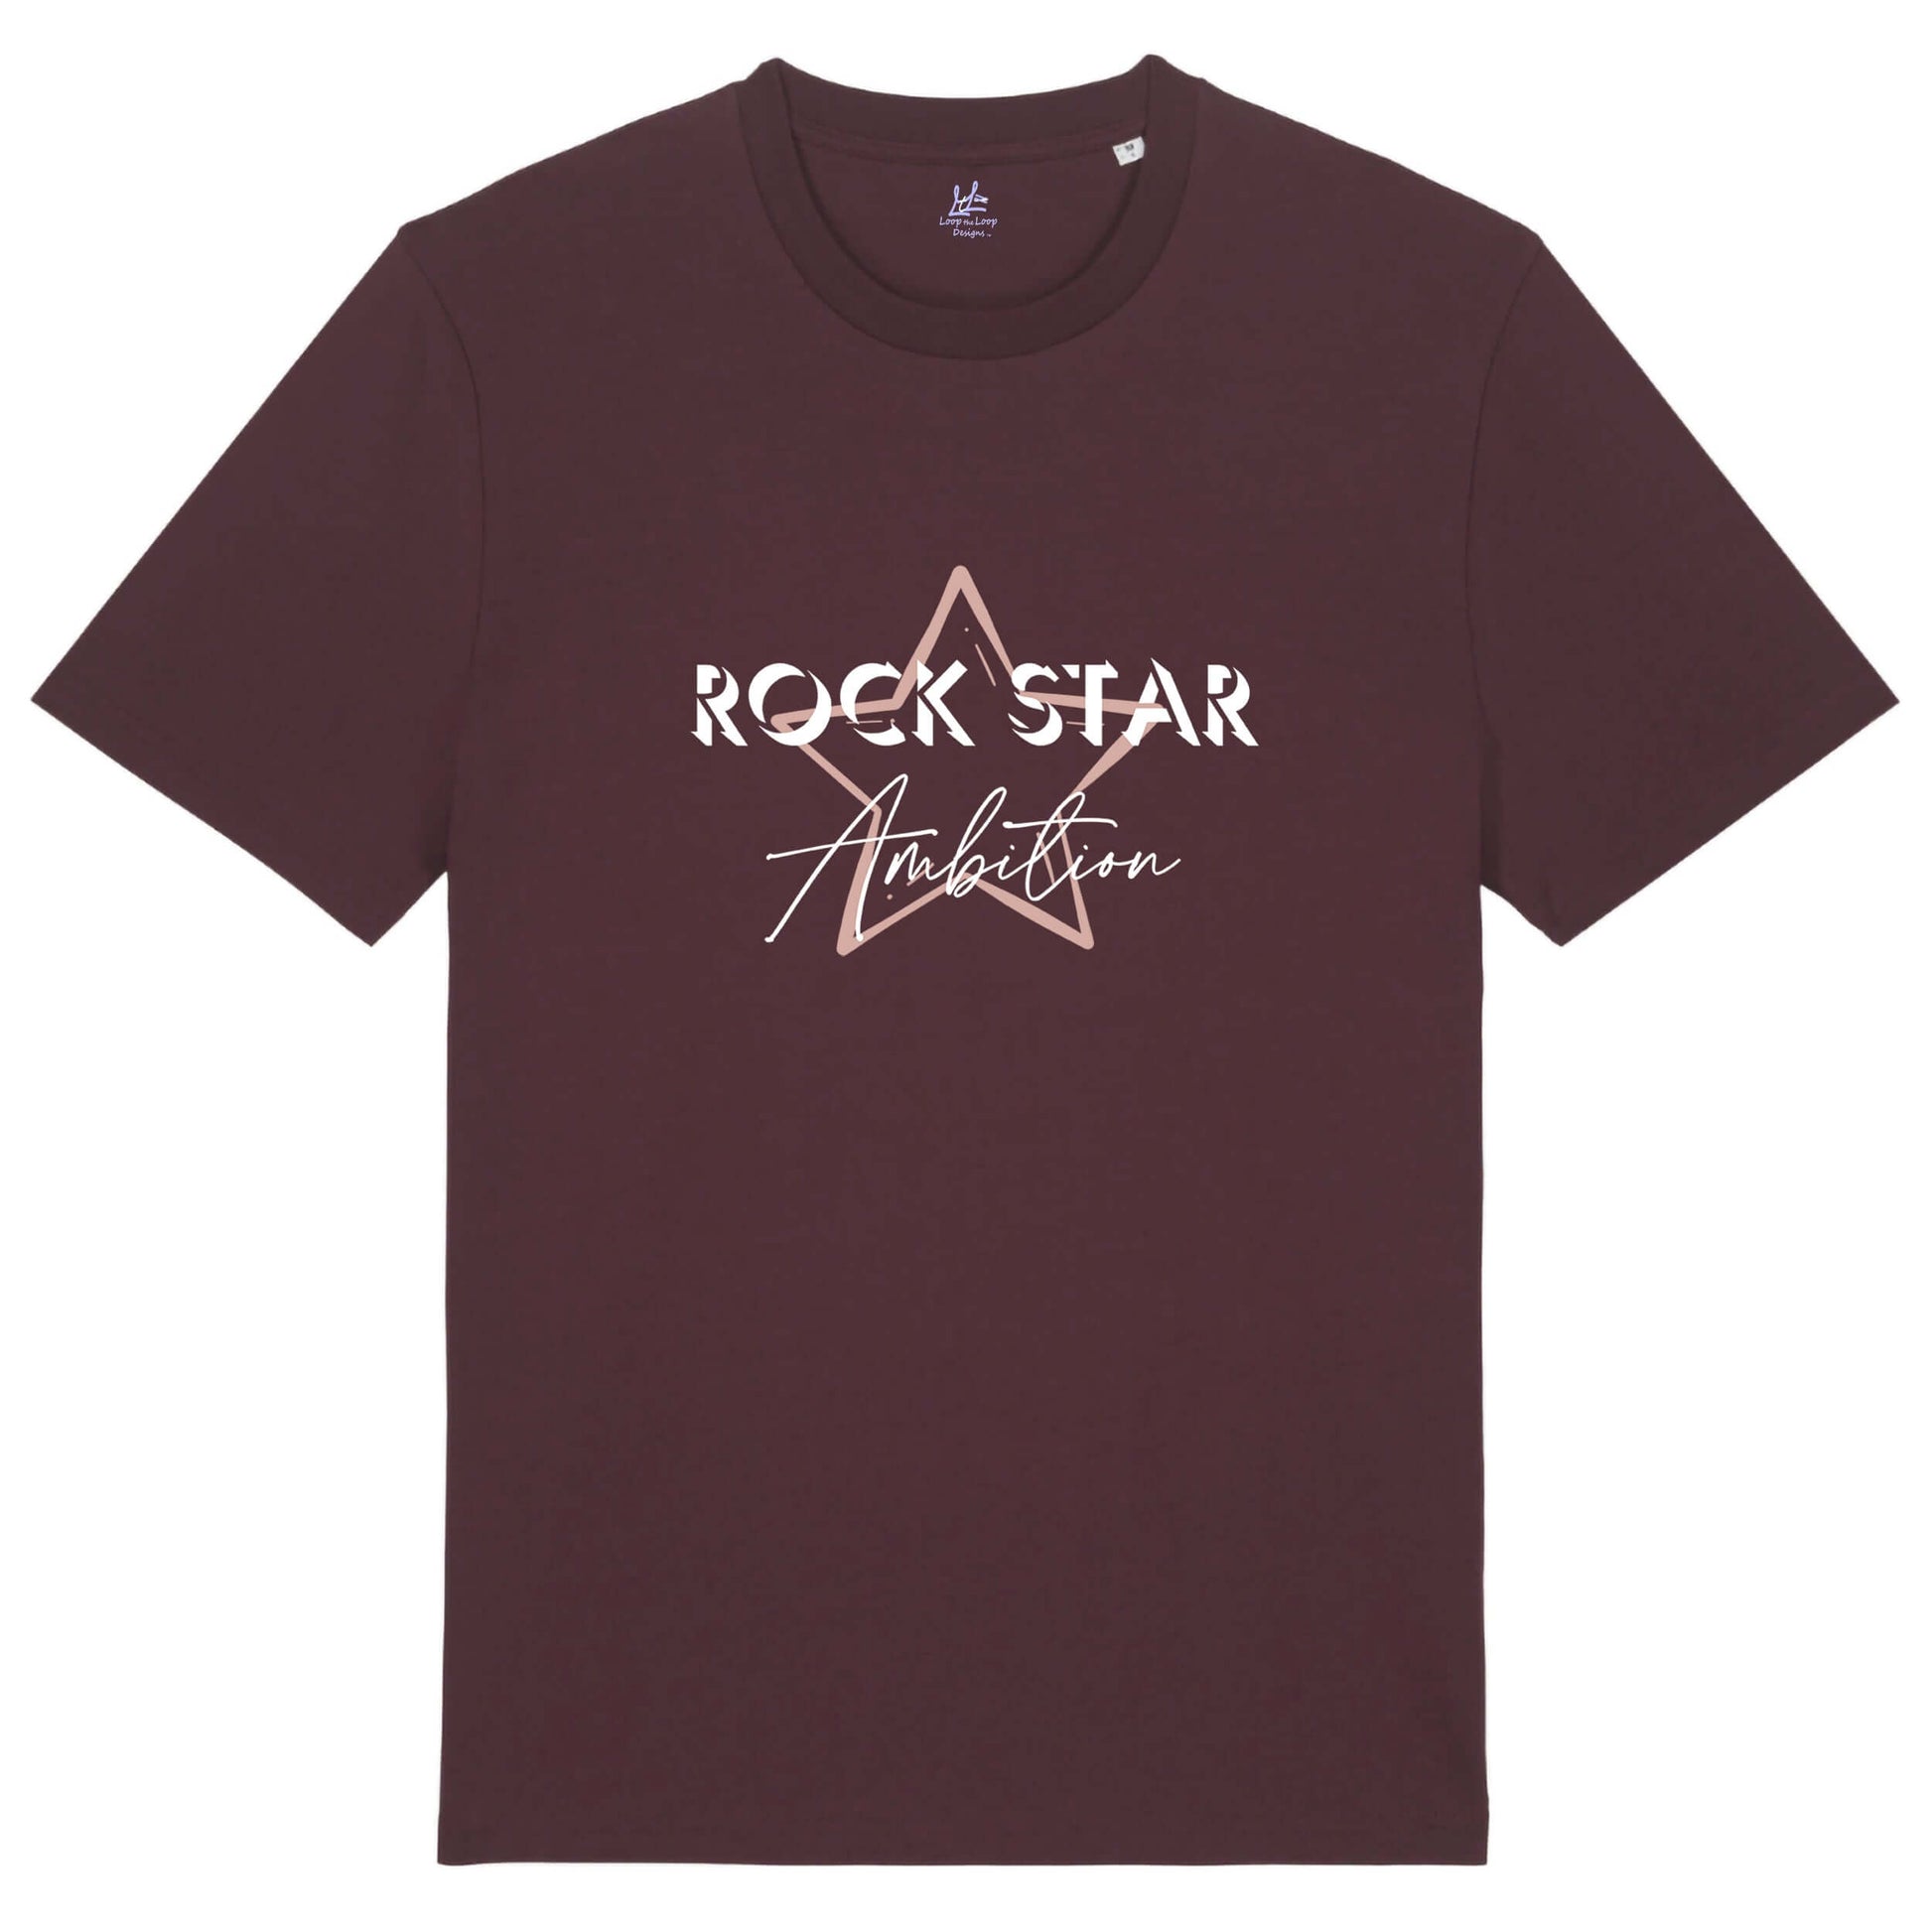 Organic Cotton relaxed fit t shirt. Men's dark red -brown short sleeve graphic tshirt. Crew neck casual wear. Band Tee Design is pale peach star outline behind wording ROCK STAR in upper case shadowed  white text, then Ambition below in script. Rock music themed unisex casual wear top